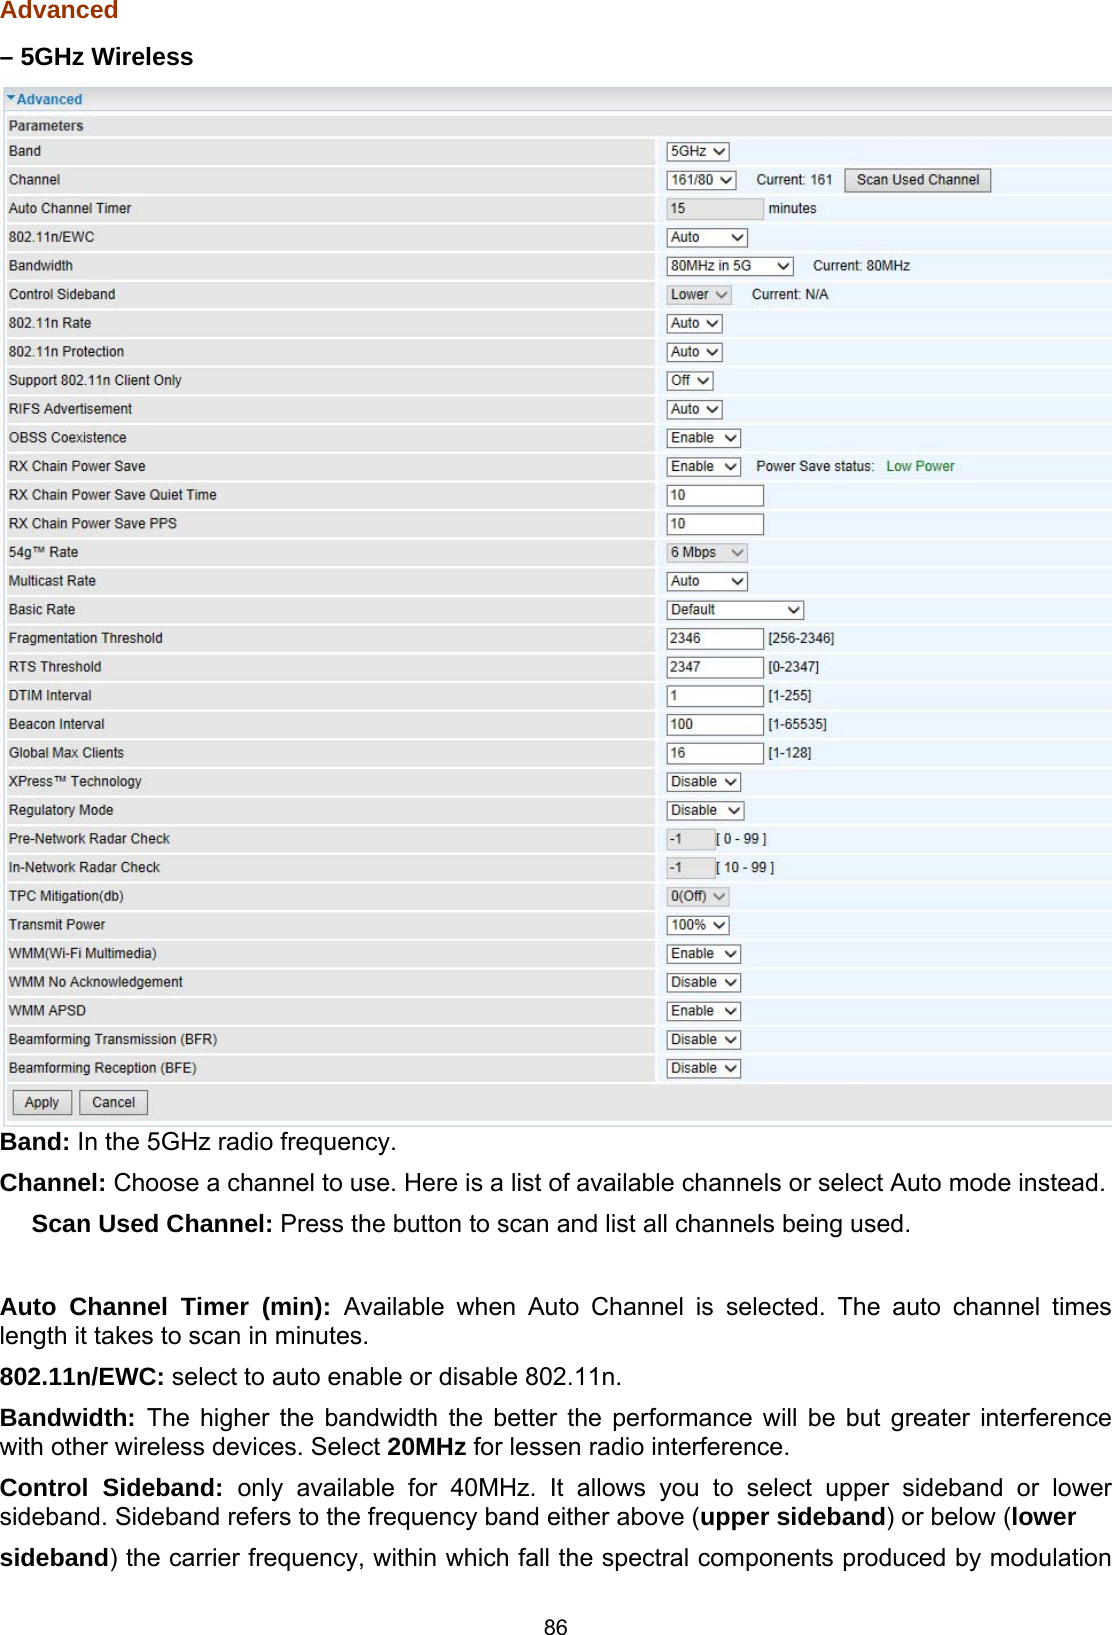  86 Advanced – 5GHz Wireless  Band: In the 5GHz radio frequency.  Channel: Choose a channel to use. Here is a list of available channels or select Auto mode instead.   　Scan Used Channel: Press the button to scan and list all channels being used.   Auto Channel Timer (min): Available when Auto Channel is selected. The auto channel times length it takes to scan in minutes.  802.11n/EWC: select to auto enable or disable 802.11n.  Bandwidth: The higher the bandwidth the better the performance will be but greater interference with other wireless devices. Select 20MHz for lessen radio interference.  Control Sideband: only available for 40MHz. It allows you to select upper sideband or lower sideband. Sideband refers to the frequency band either above (upper sideband) or below (lower  sideband) the carrier frequency, within which fall the spectral components produced by modulation 